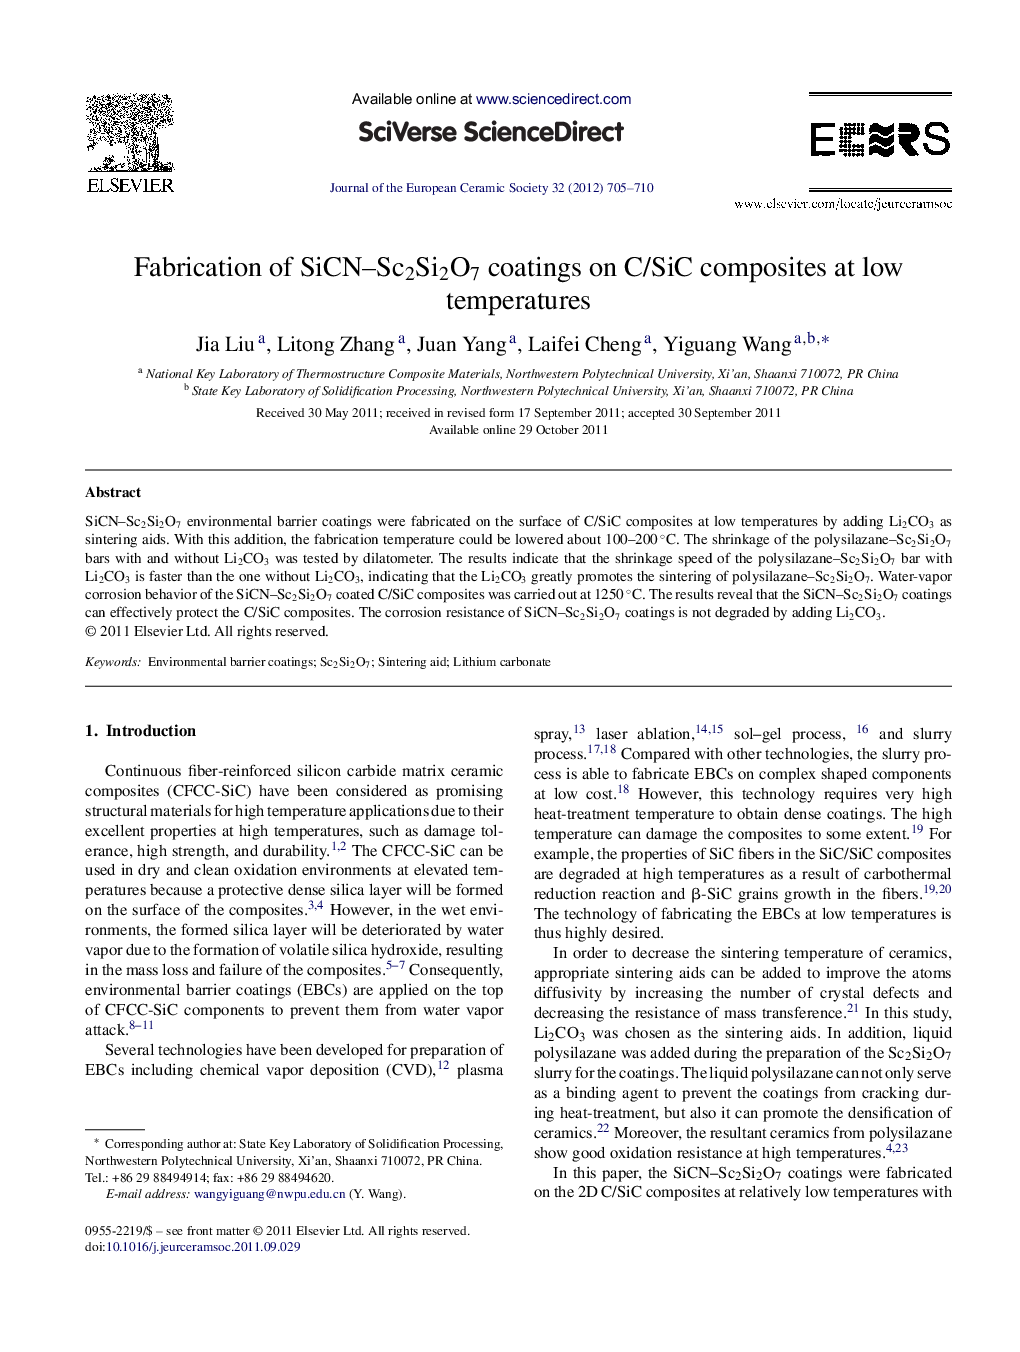 Fabrication of SiCN-Sc2Si2O7 coatings on C/SiC composites at low temperatures